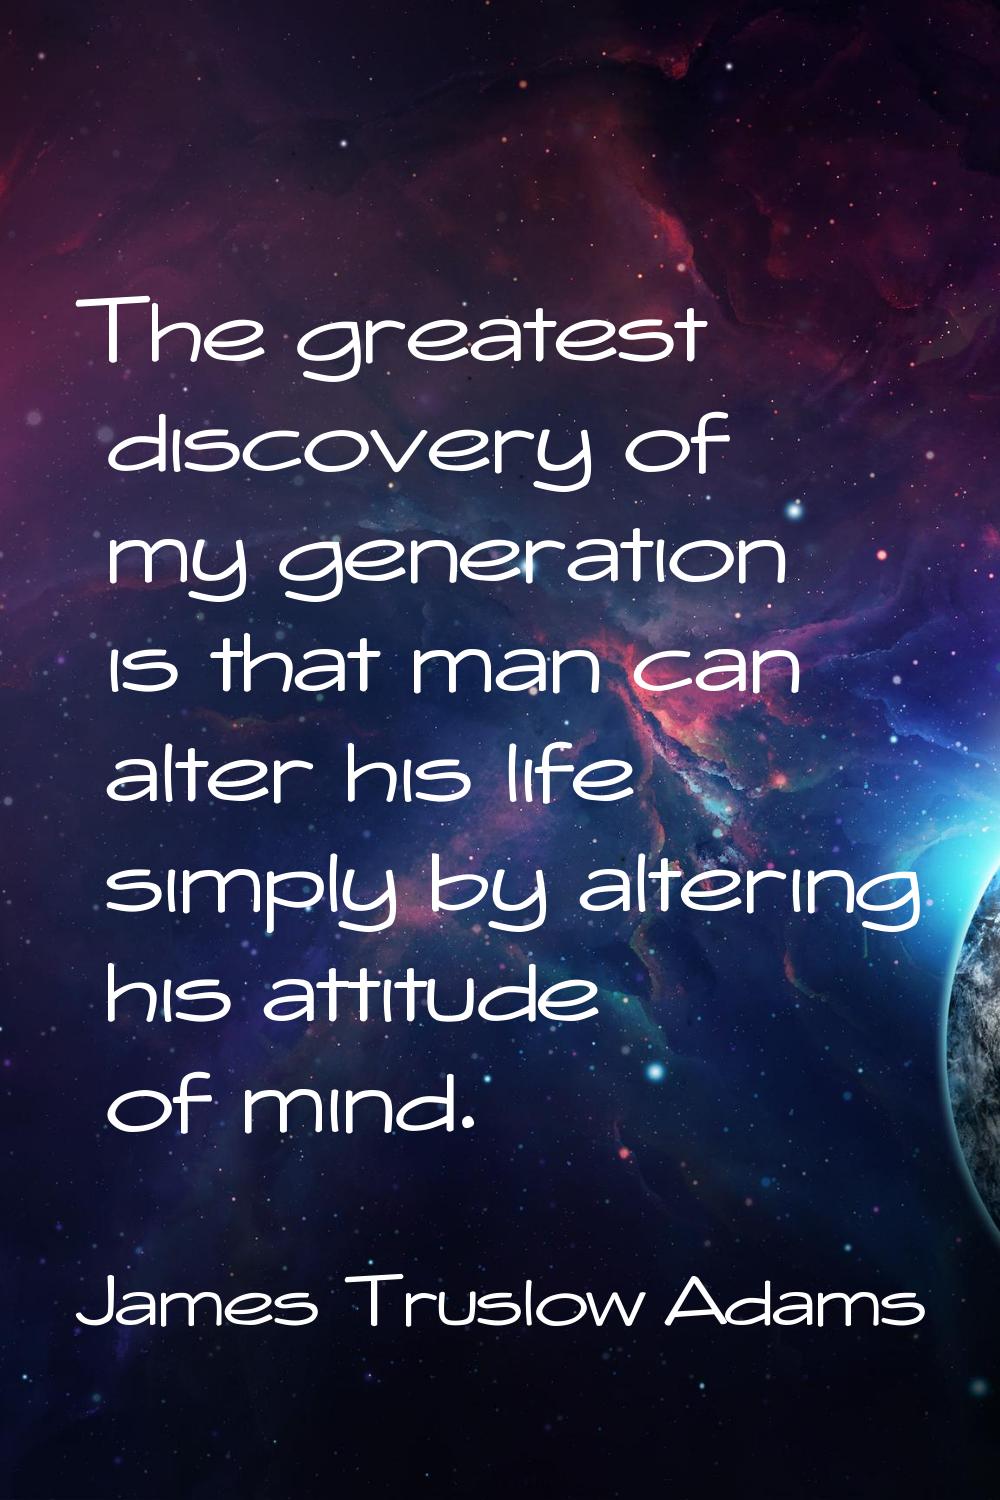 The greatest discovery of my generation is that man can alter his life simply by altering his attit